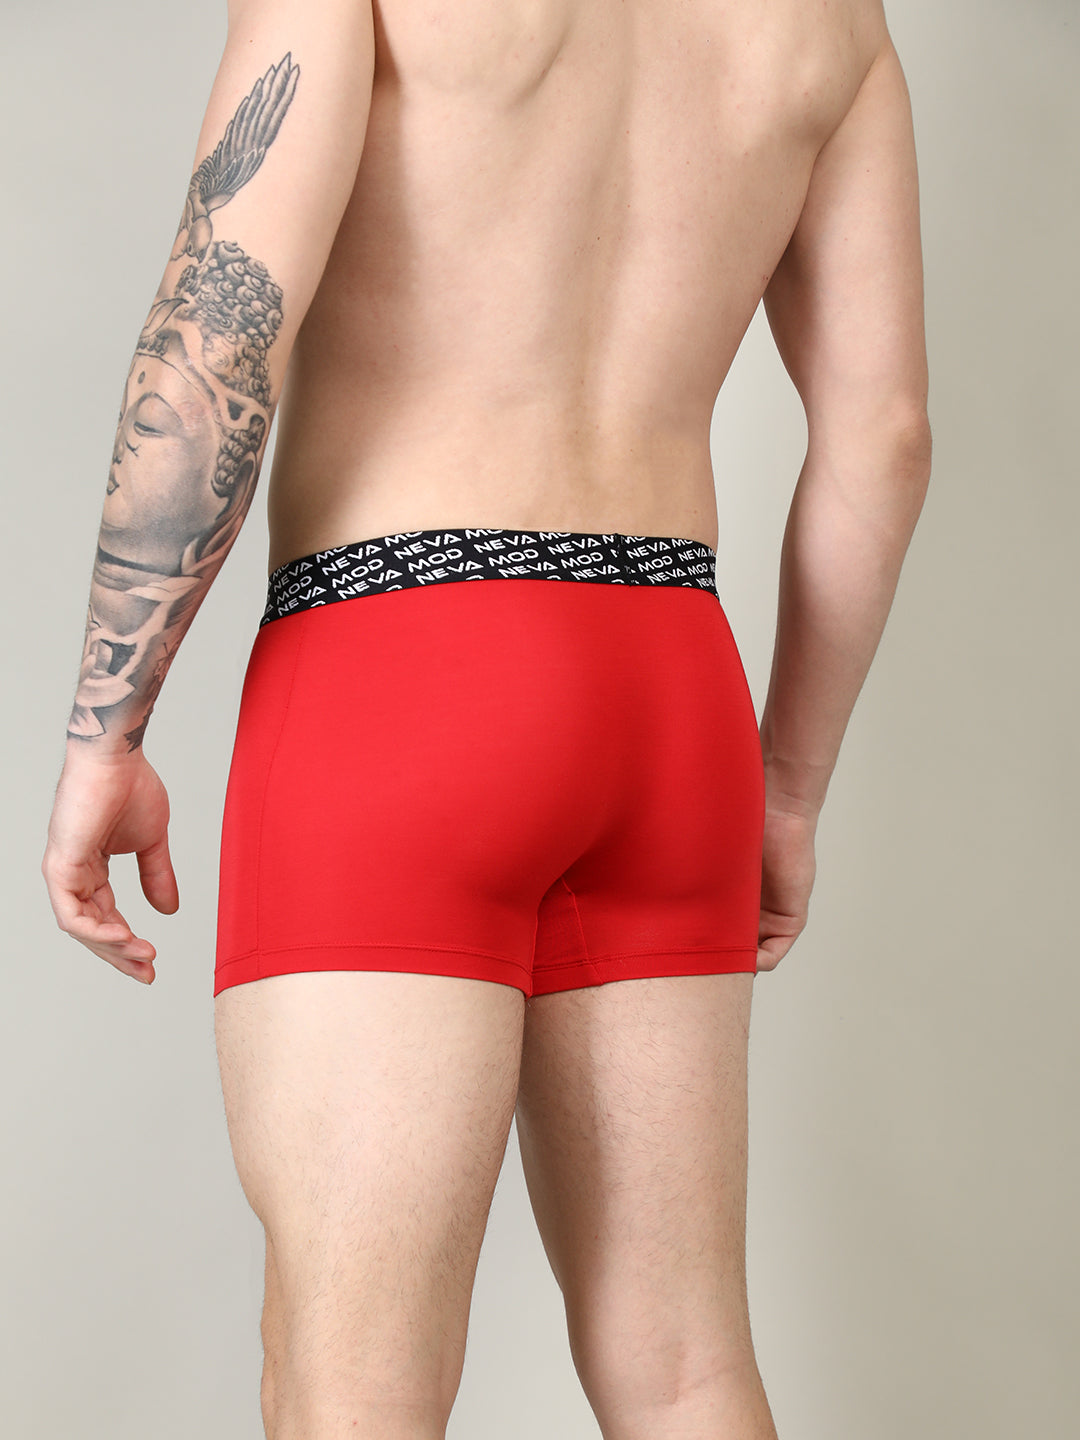 Neva Modal Solid Short Trunk Underwear for Men- Olive, Red, Steel Grey Collection (Pack of 3)